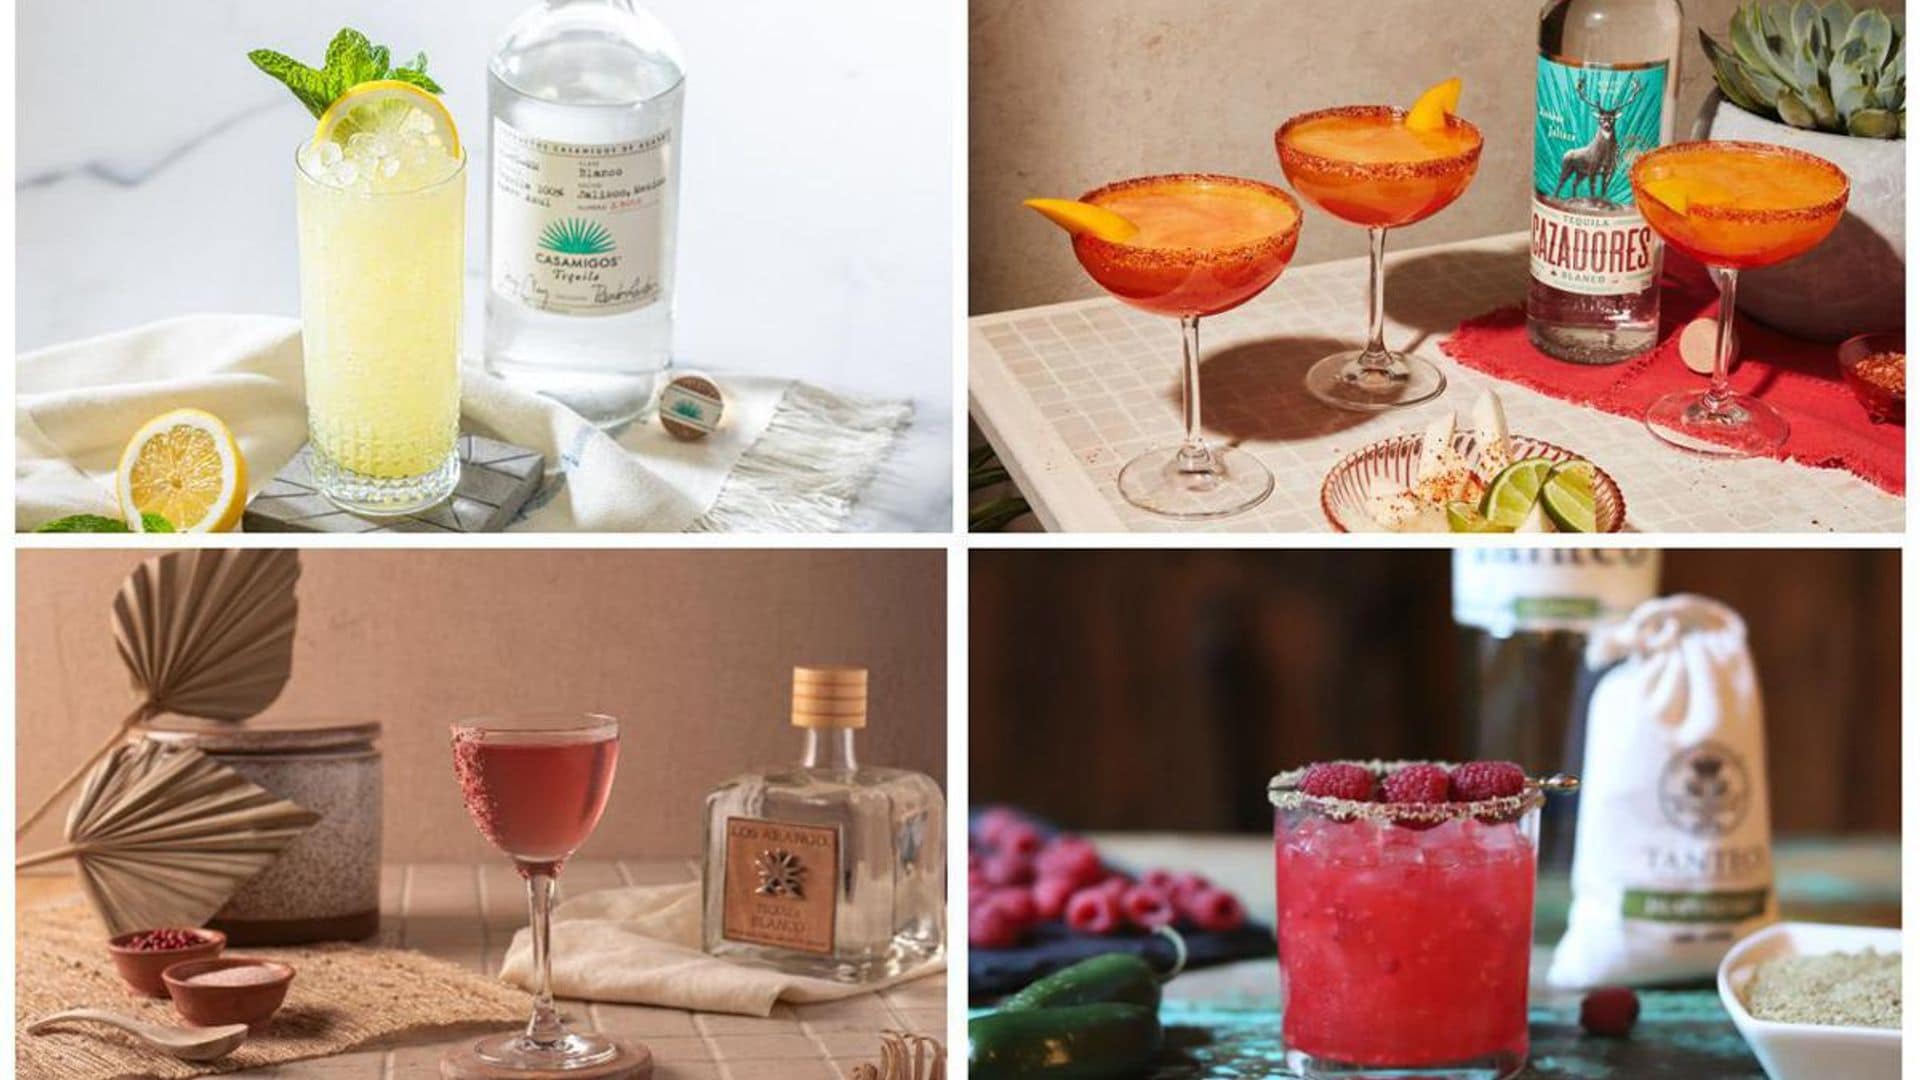 Celebrate National Tequila Day with these tasty cocktail recipes